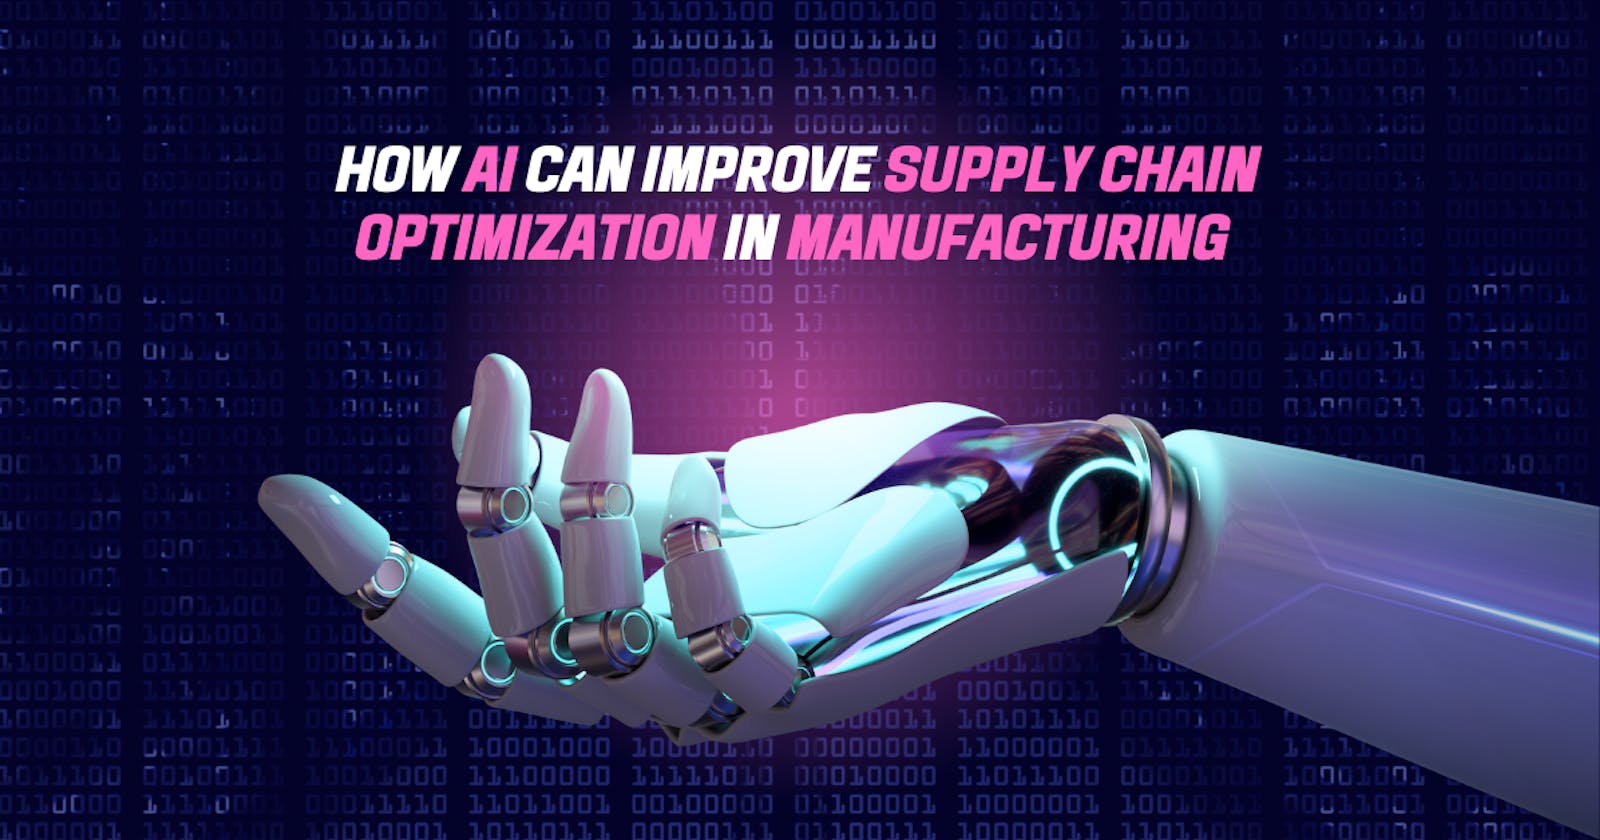 How AI Can Improve Supply Chain Optimization in Manufacturing